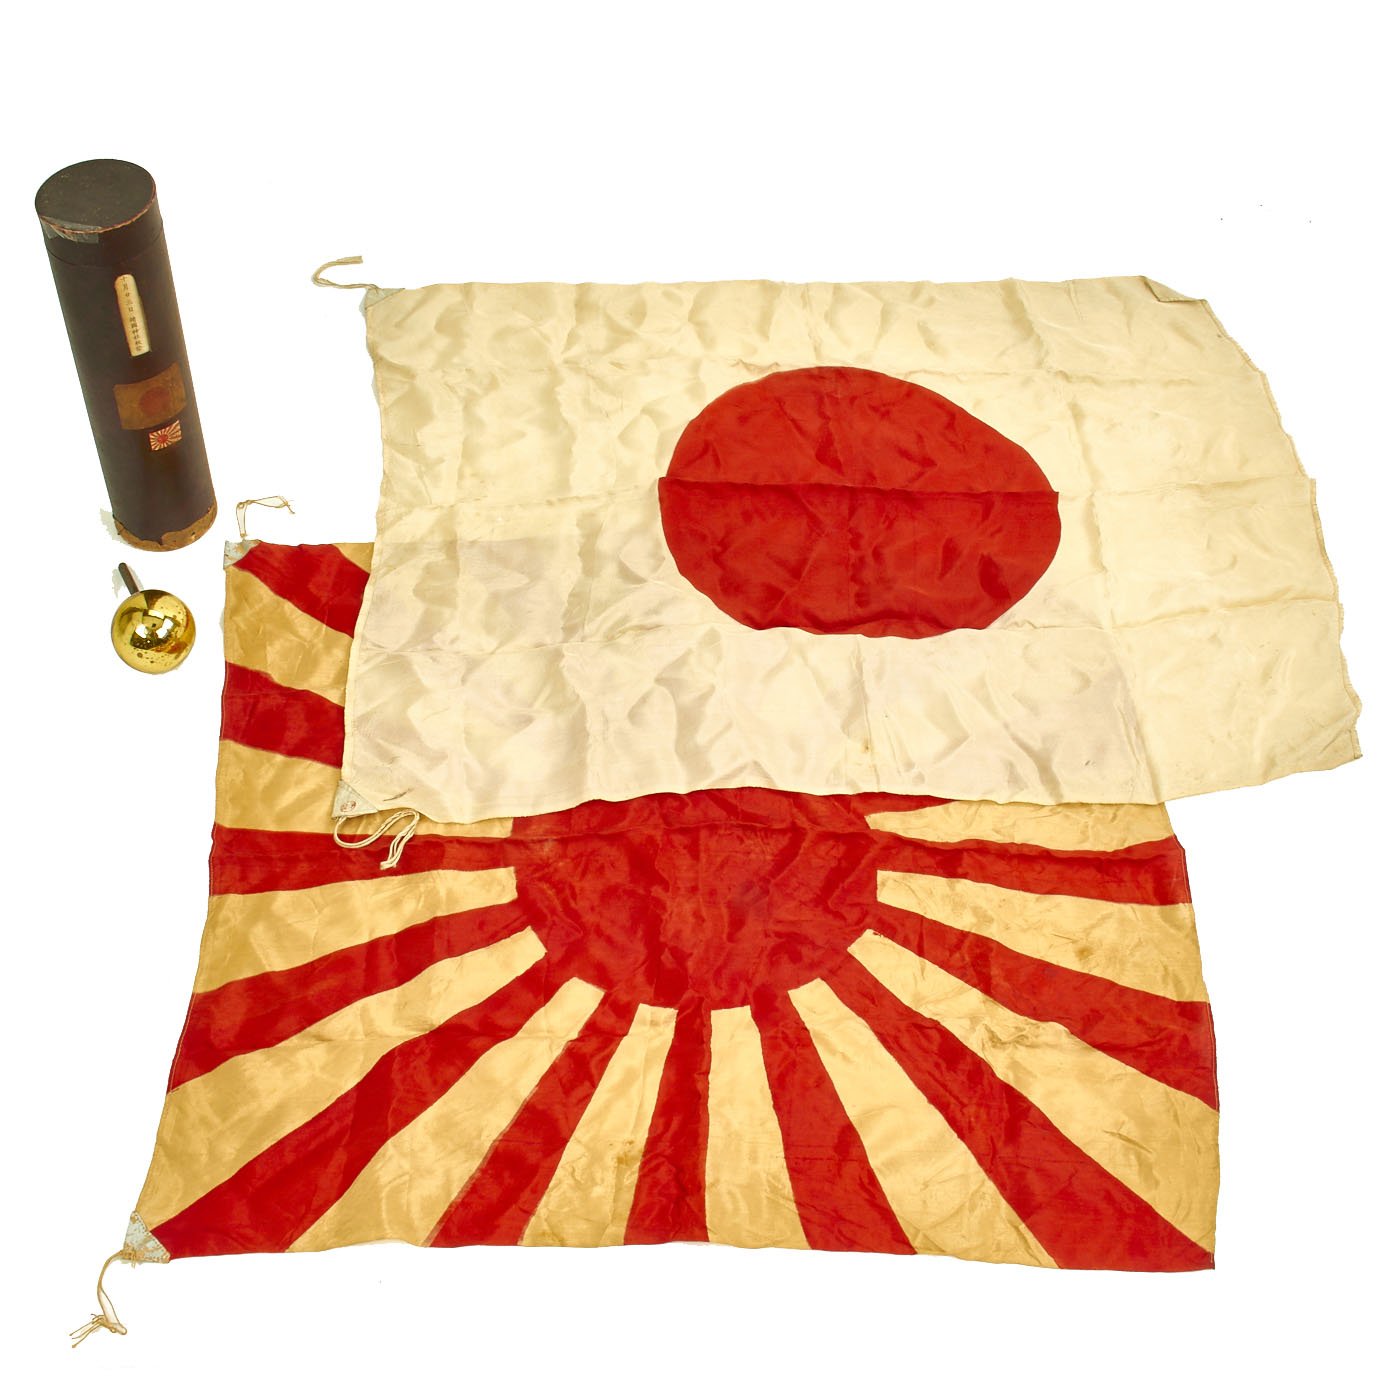 Original Wwii Japanese Flag Set In Case With Pole Top 27 X 31 Risin International Military Antiques